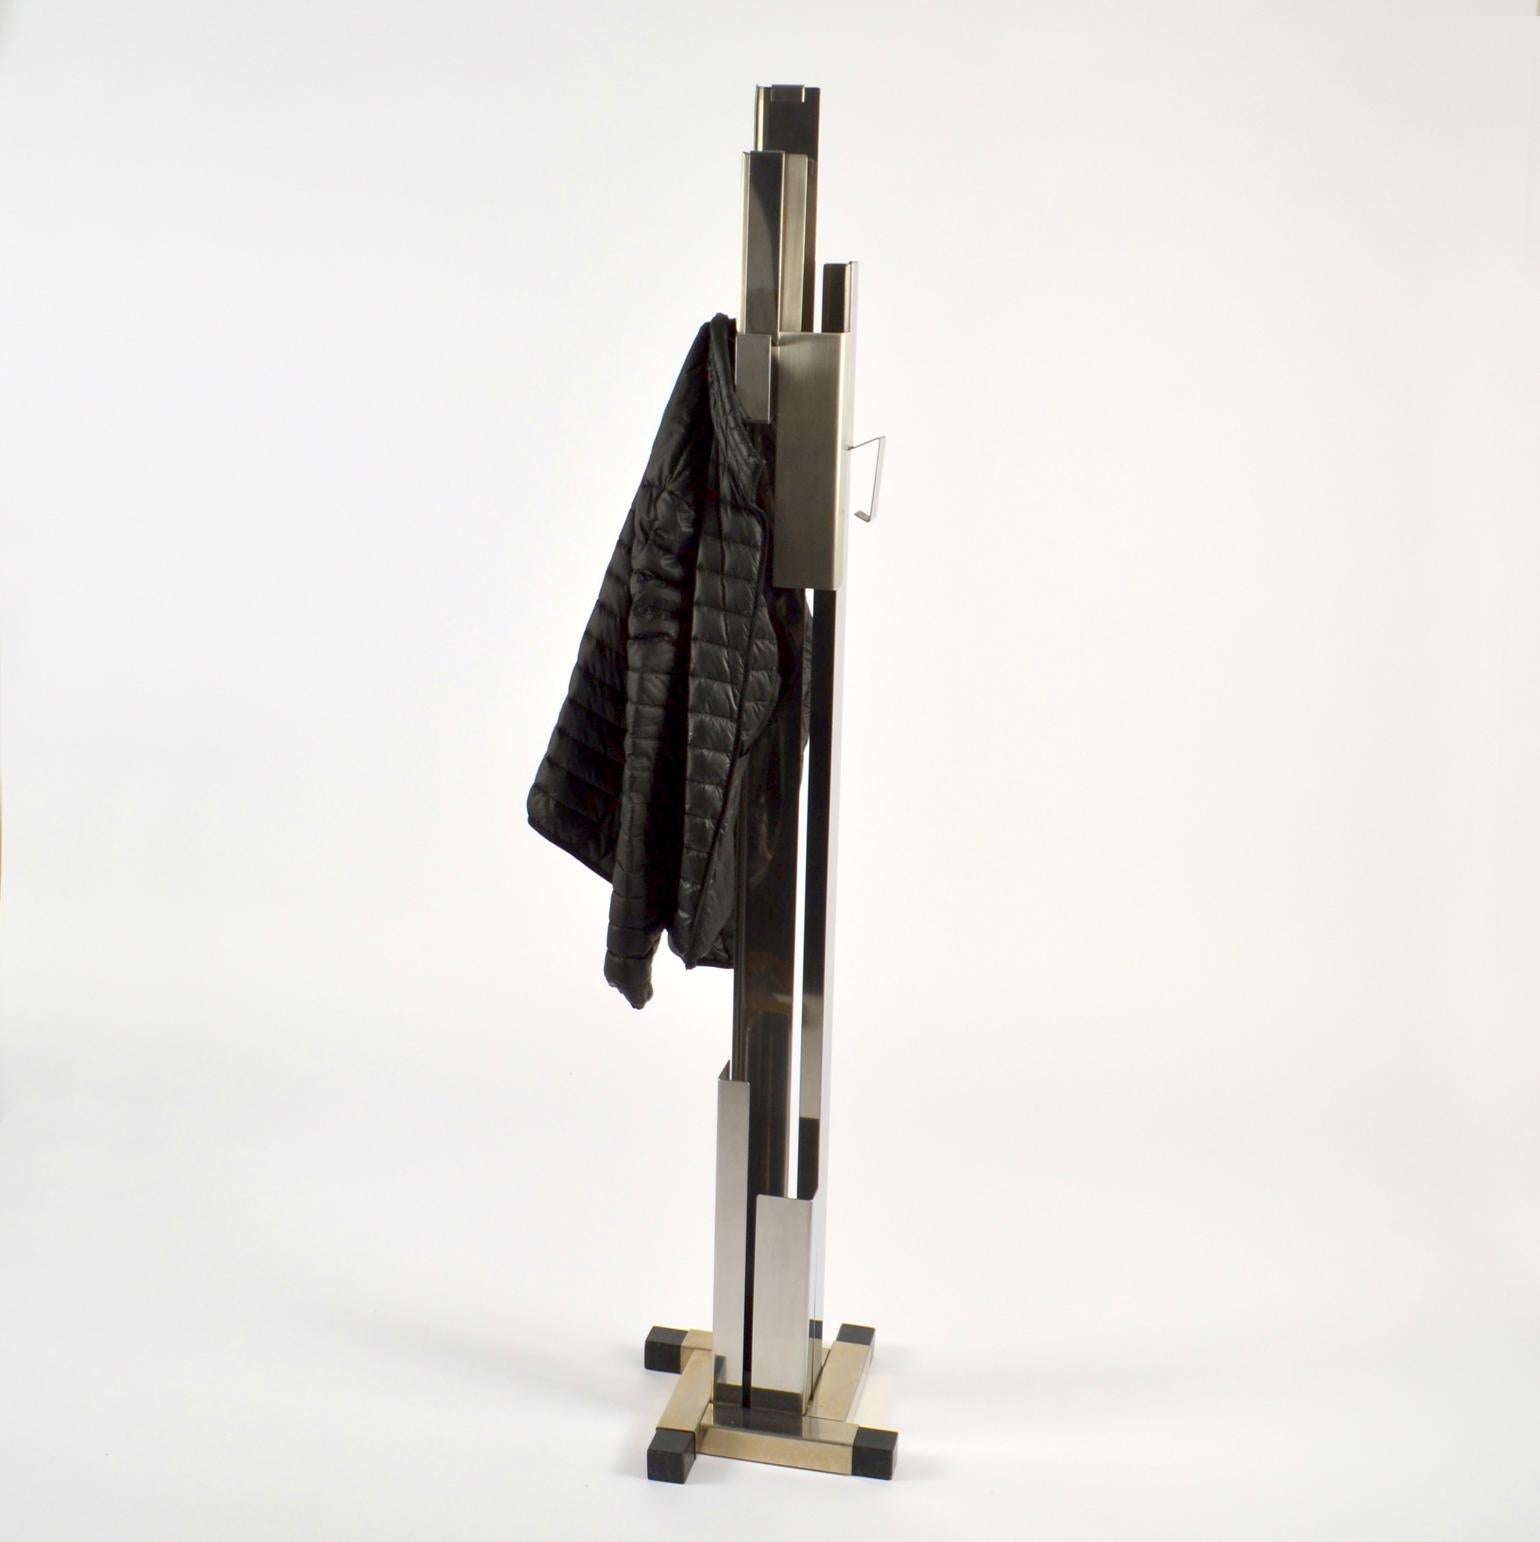 Sculptural Italian 1960s freestanding coat and umbrella stand is an eye-catching and functional object. It  is formed by folded stainless steel , partly brushed or polished, has four hooks attached on different sides. The base is extended with